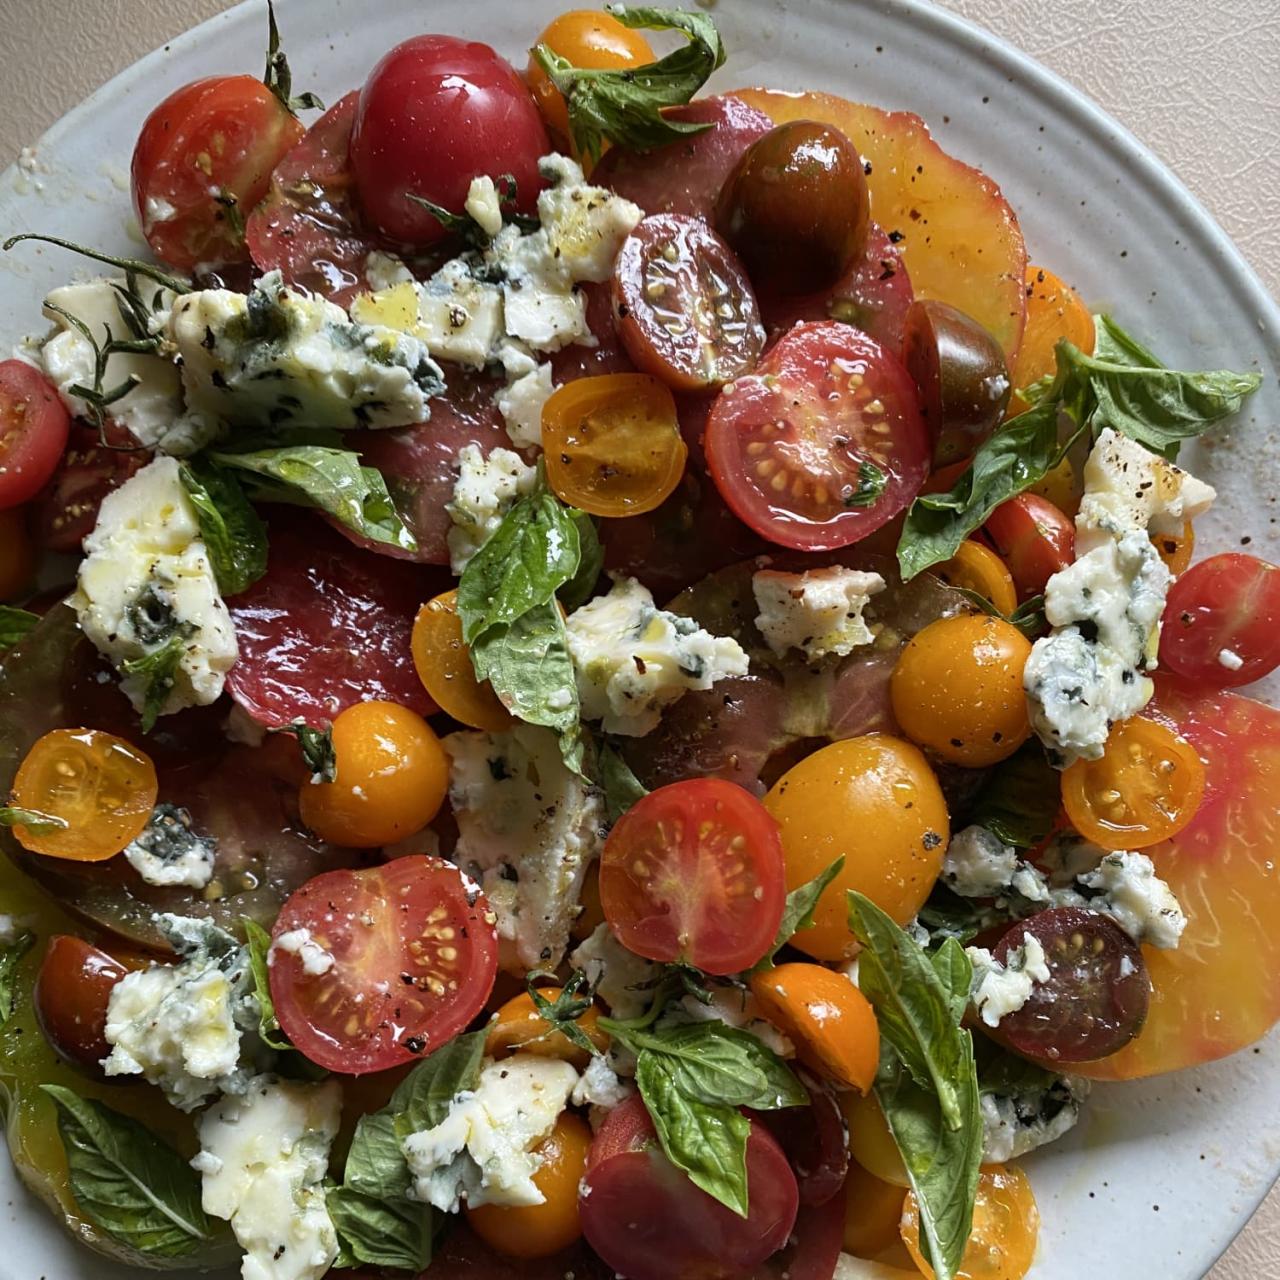 Ina Garten's Heirloom Tomato Salad (Recipe Review) | The Kitchn